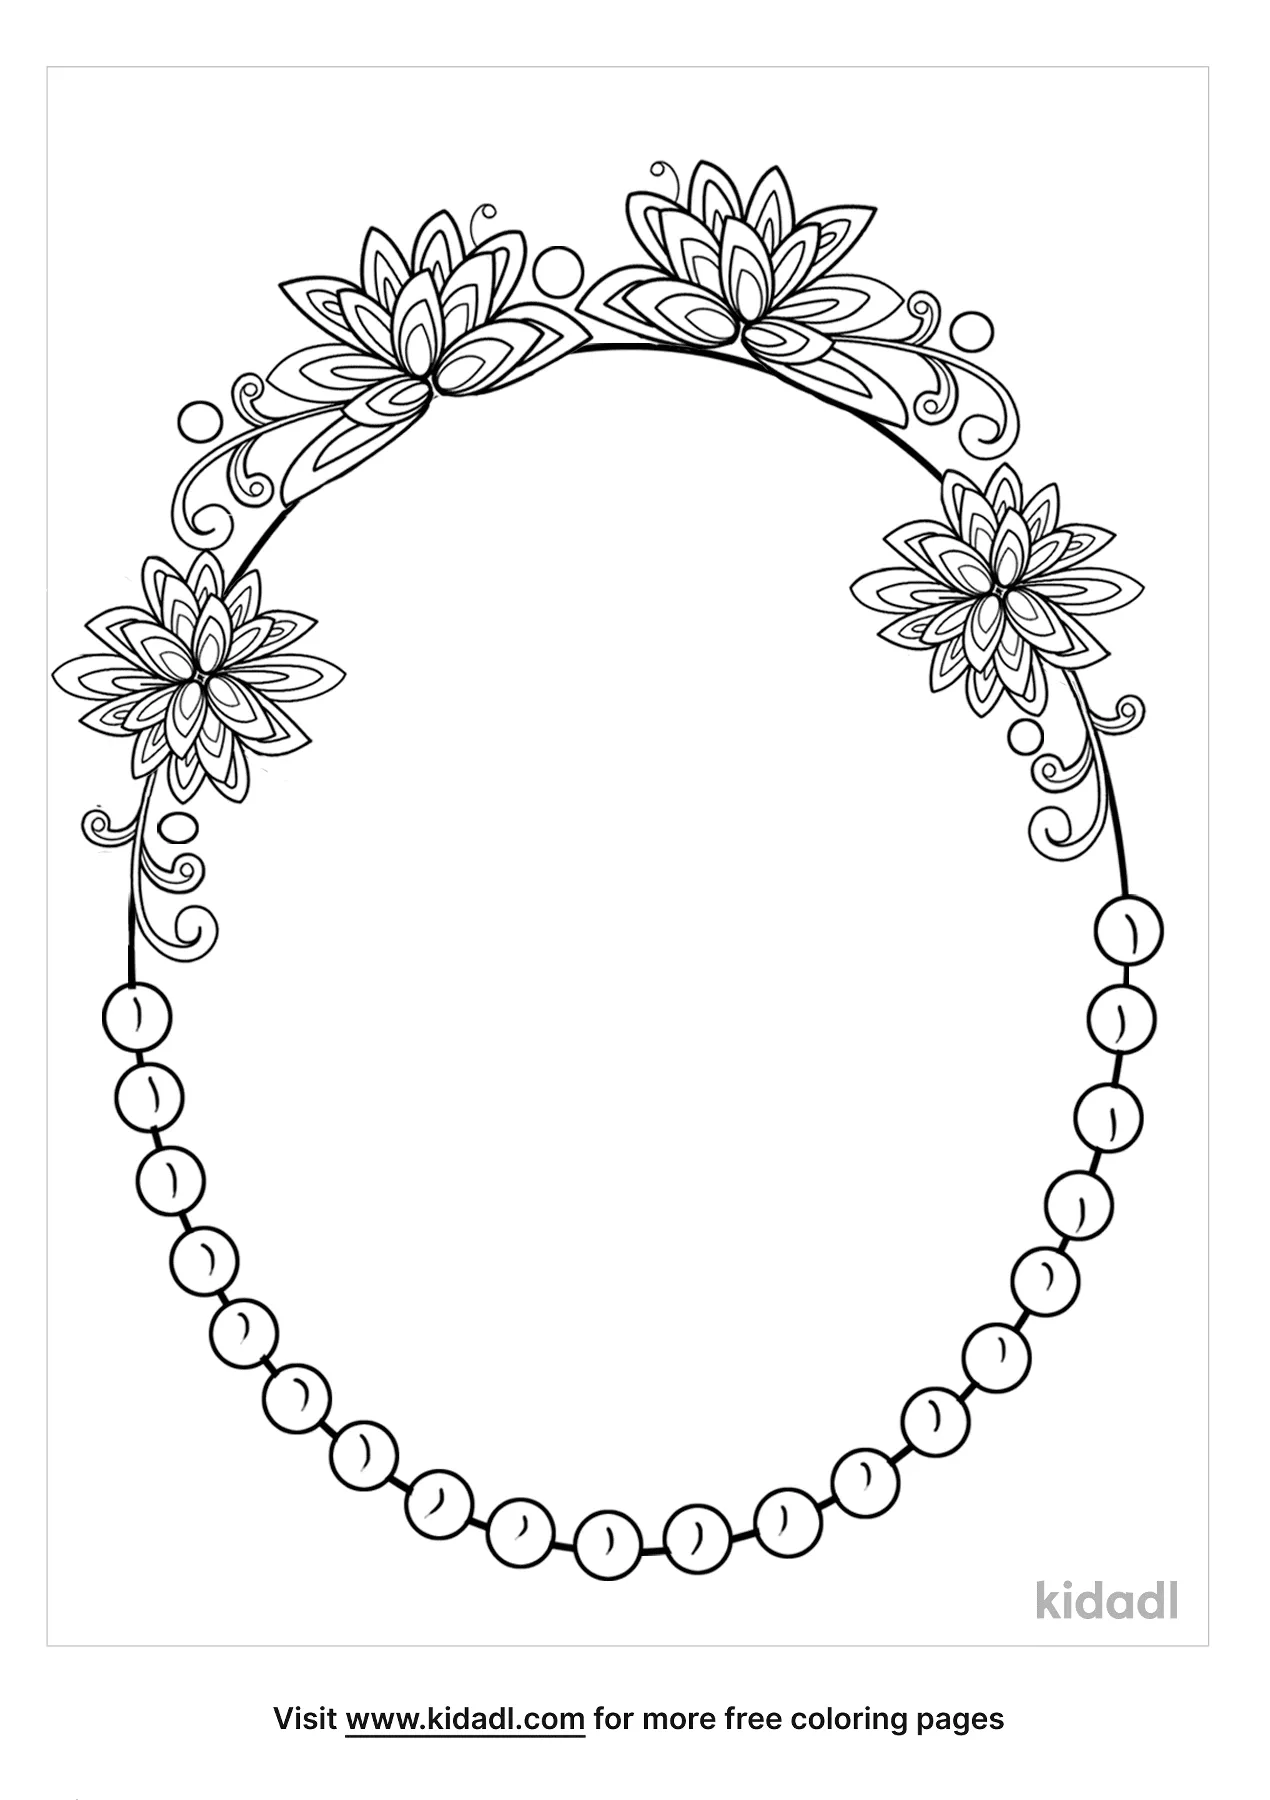 border designs coloring pages